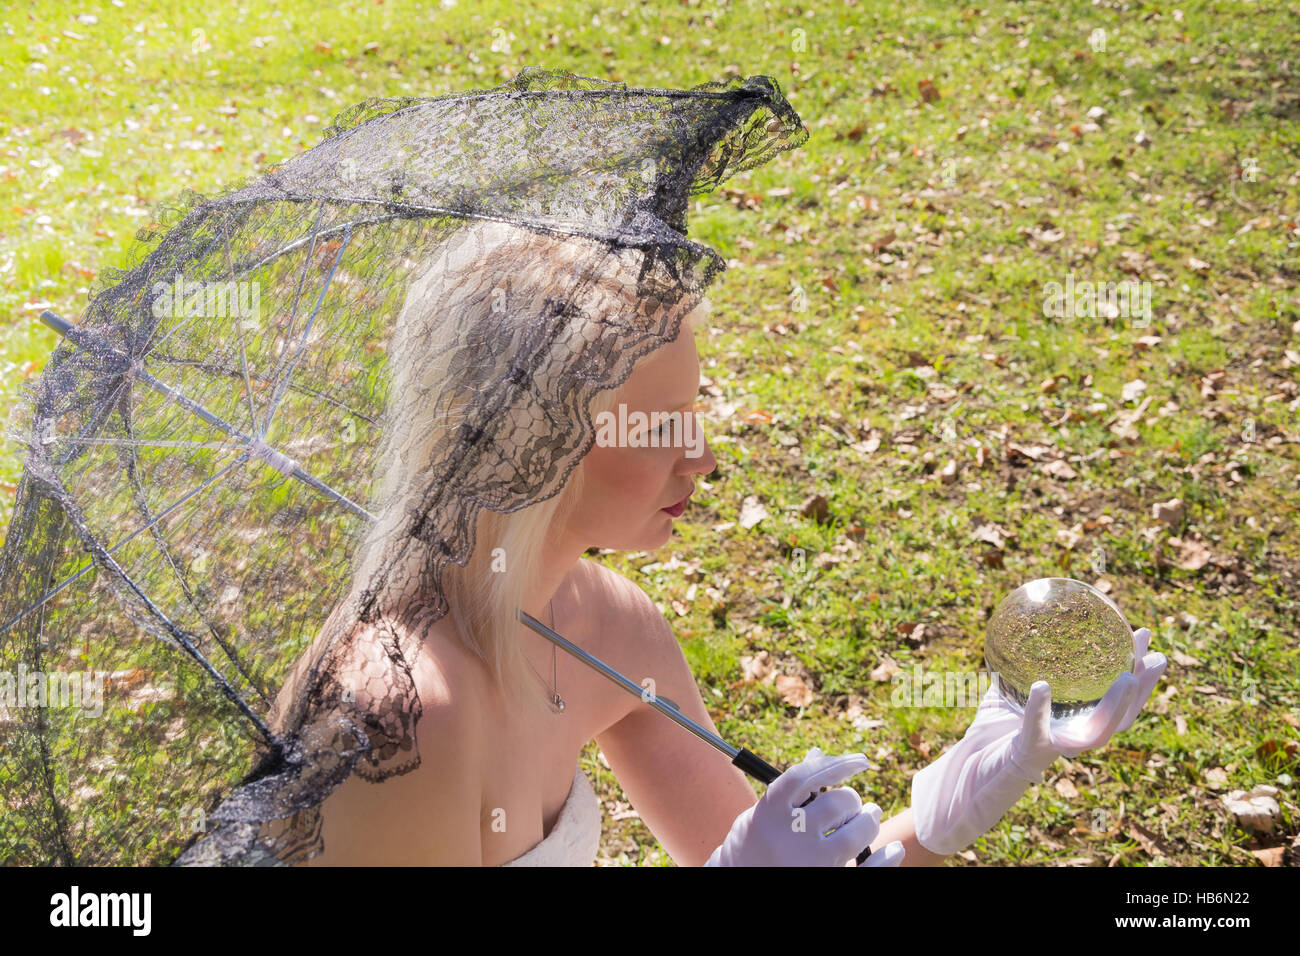 Woman with lace umbrella and glass ball Stock Photo